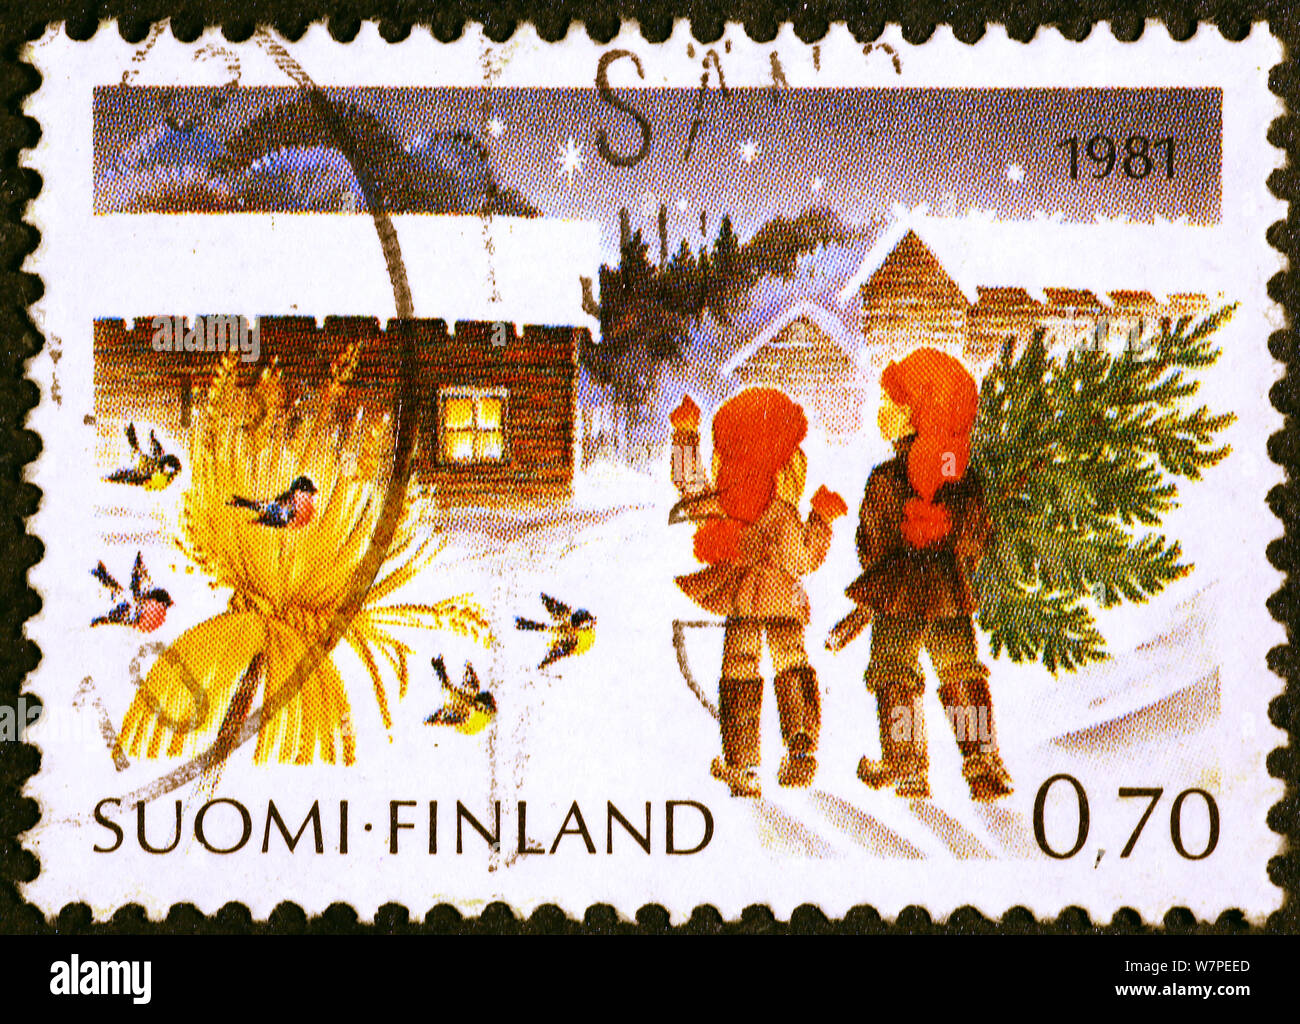 Gnomes with Christmas tree on finnish postage stamp Stock Photo